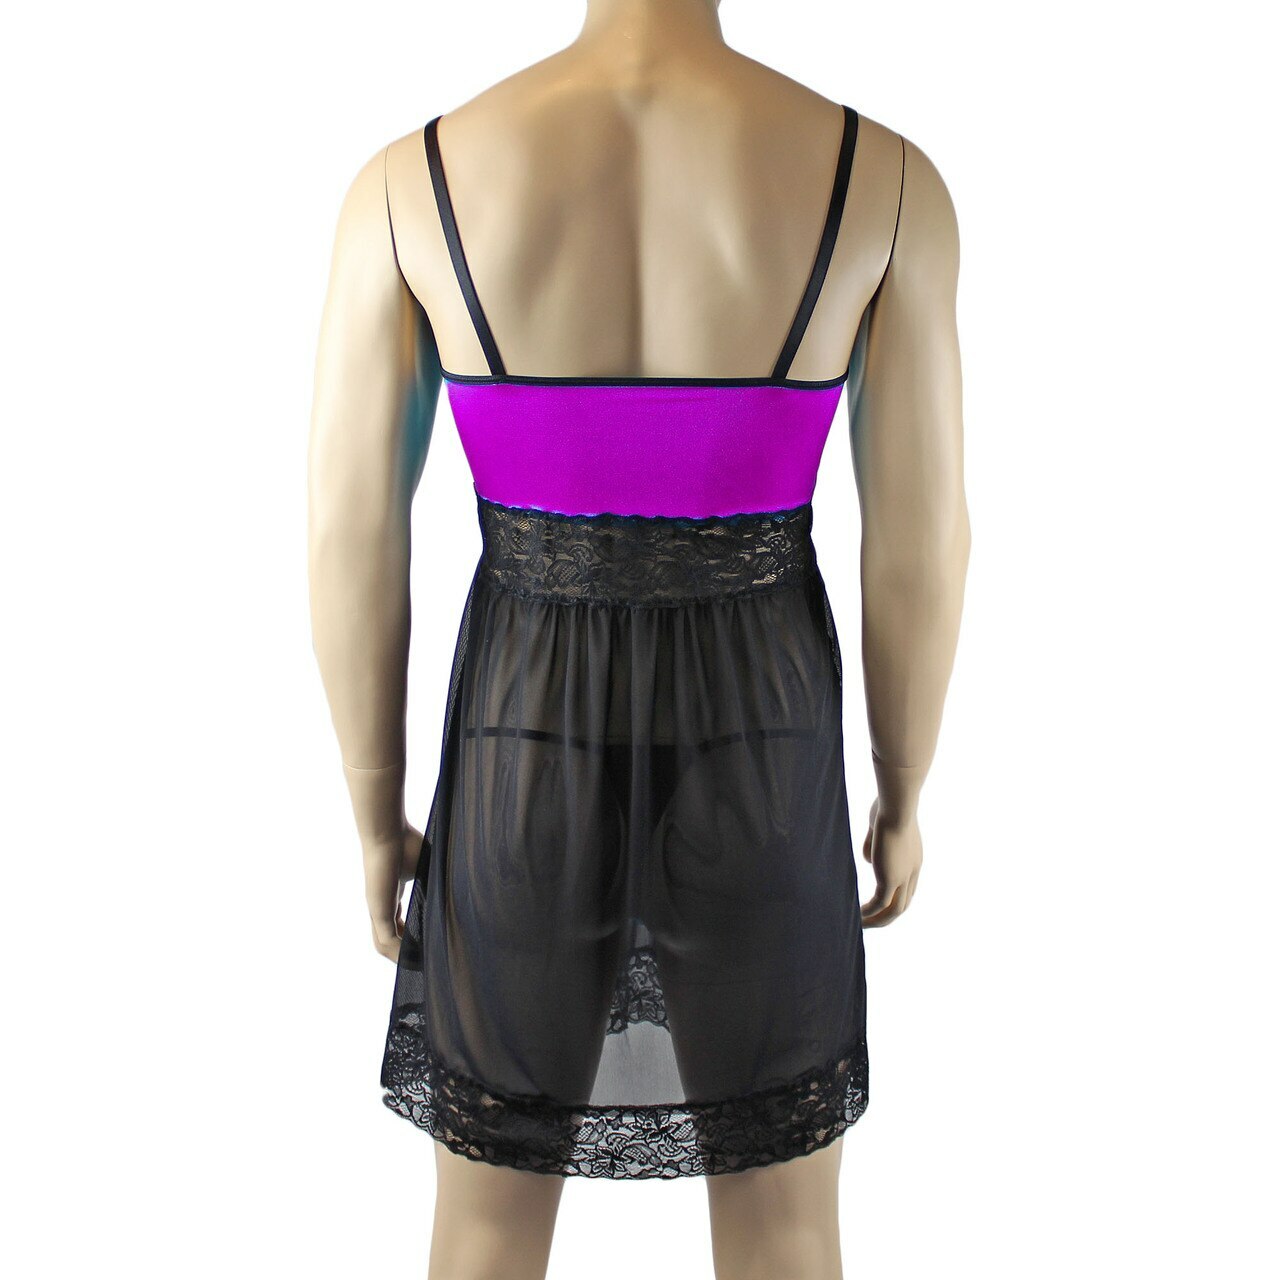 Mens Joanne Sexy Lingerie Nightwear Chemise with G string - Sizes up to 3XL Purple & Black